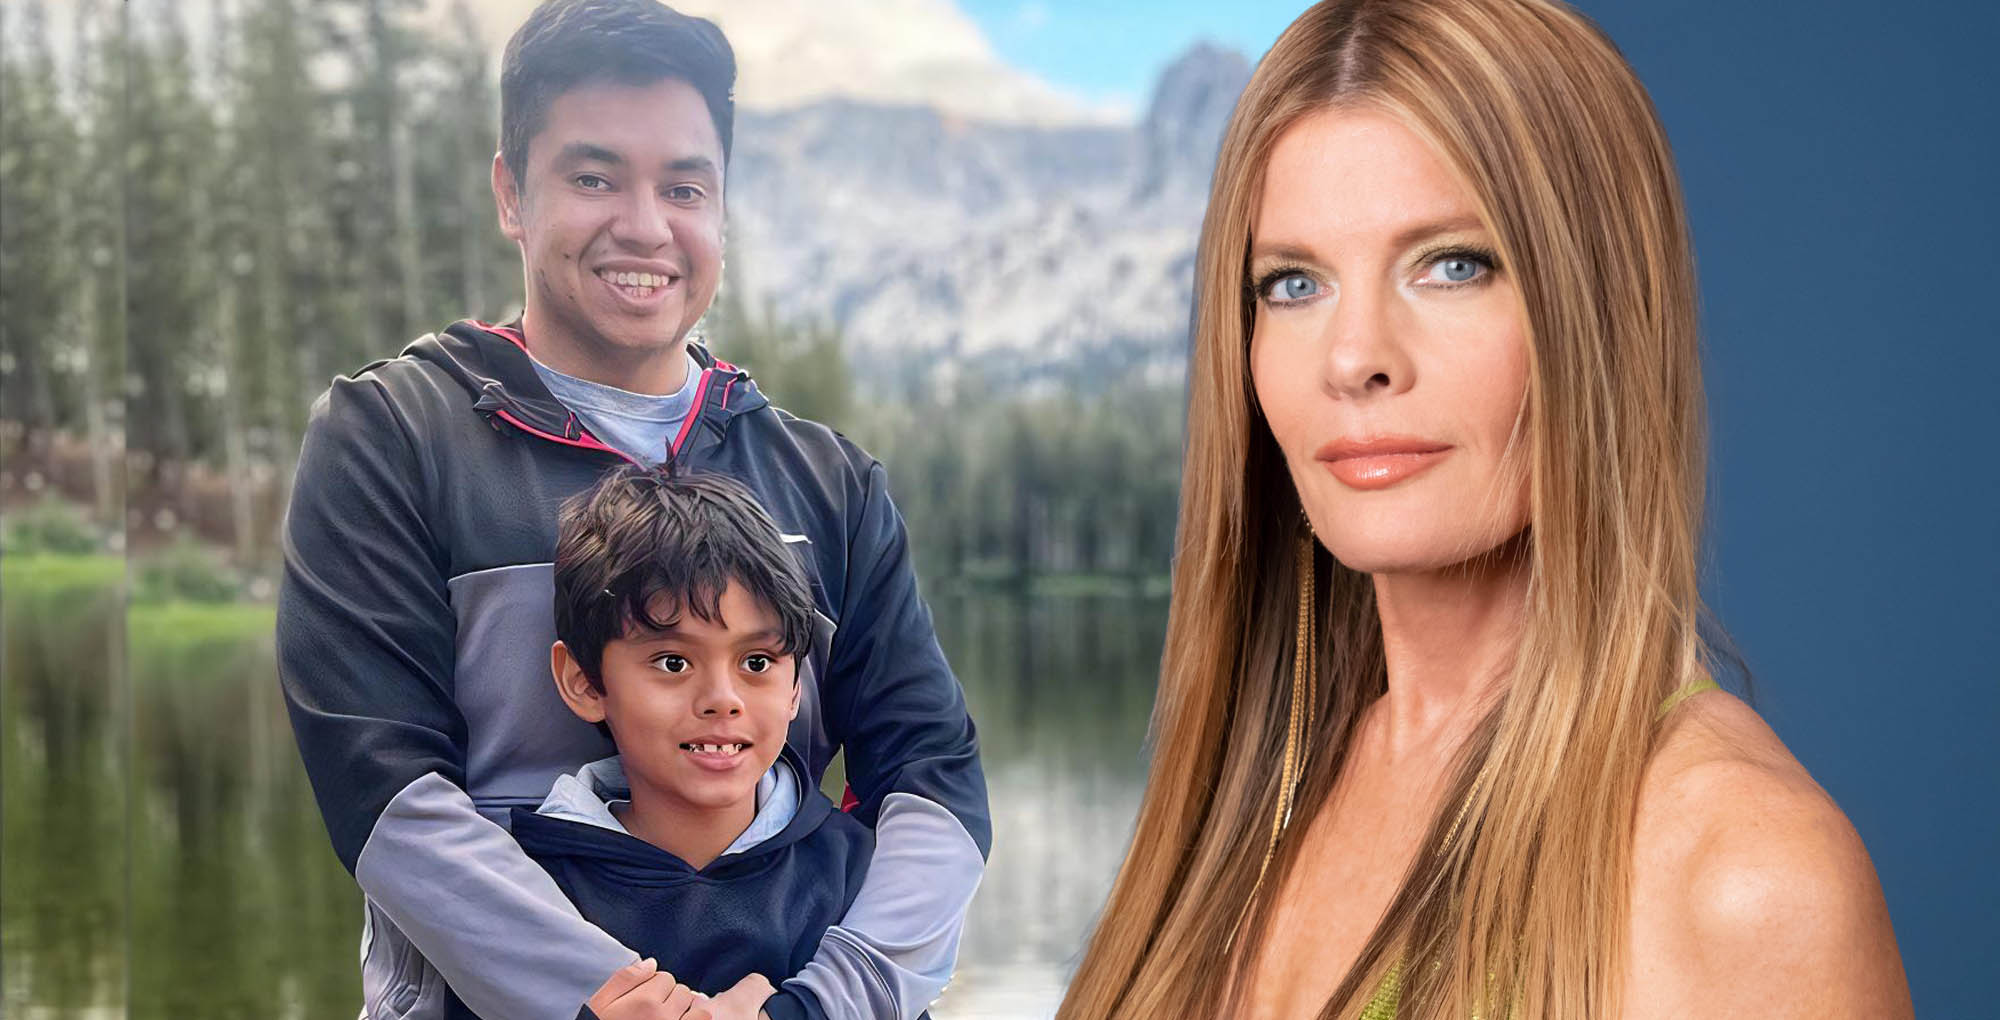 michelle stafford asks for help for marco's family.